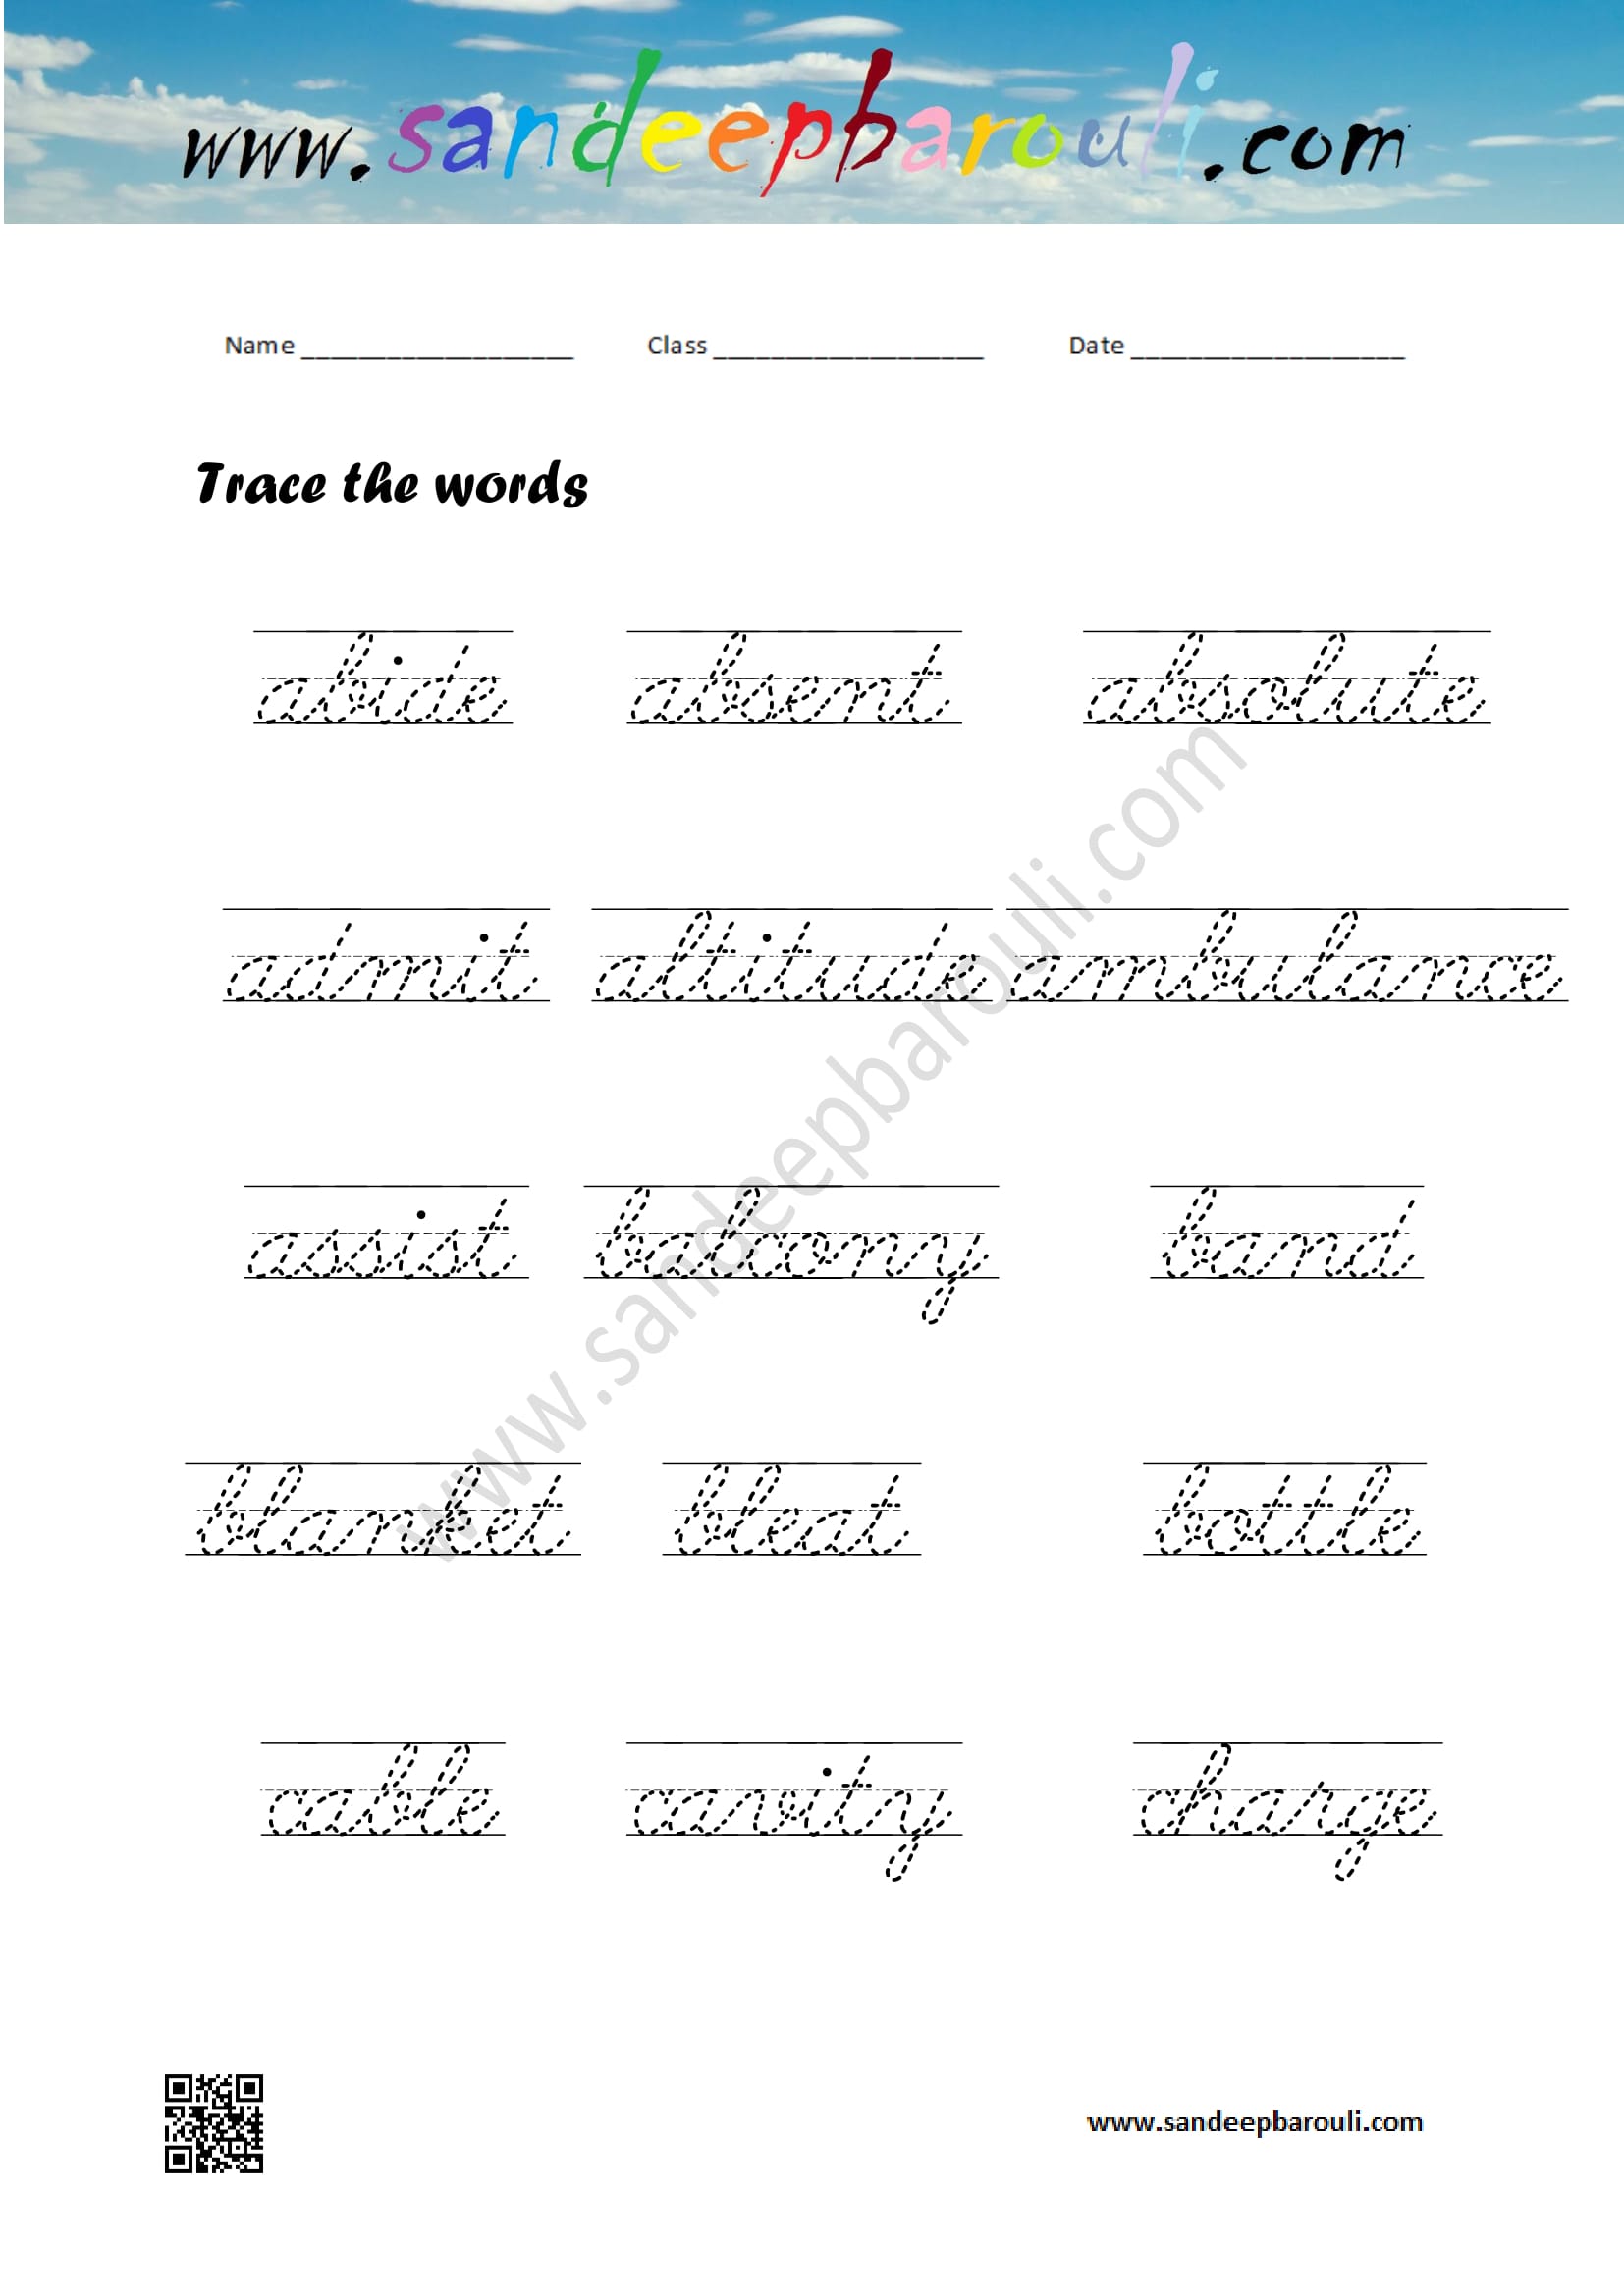 Cursive Writing Worksheet – Trace the words 61 – Educational Website